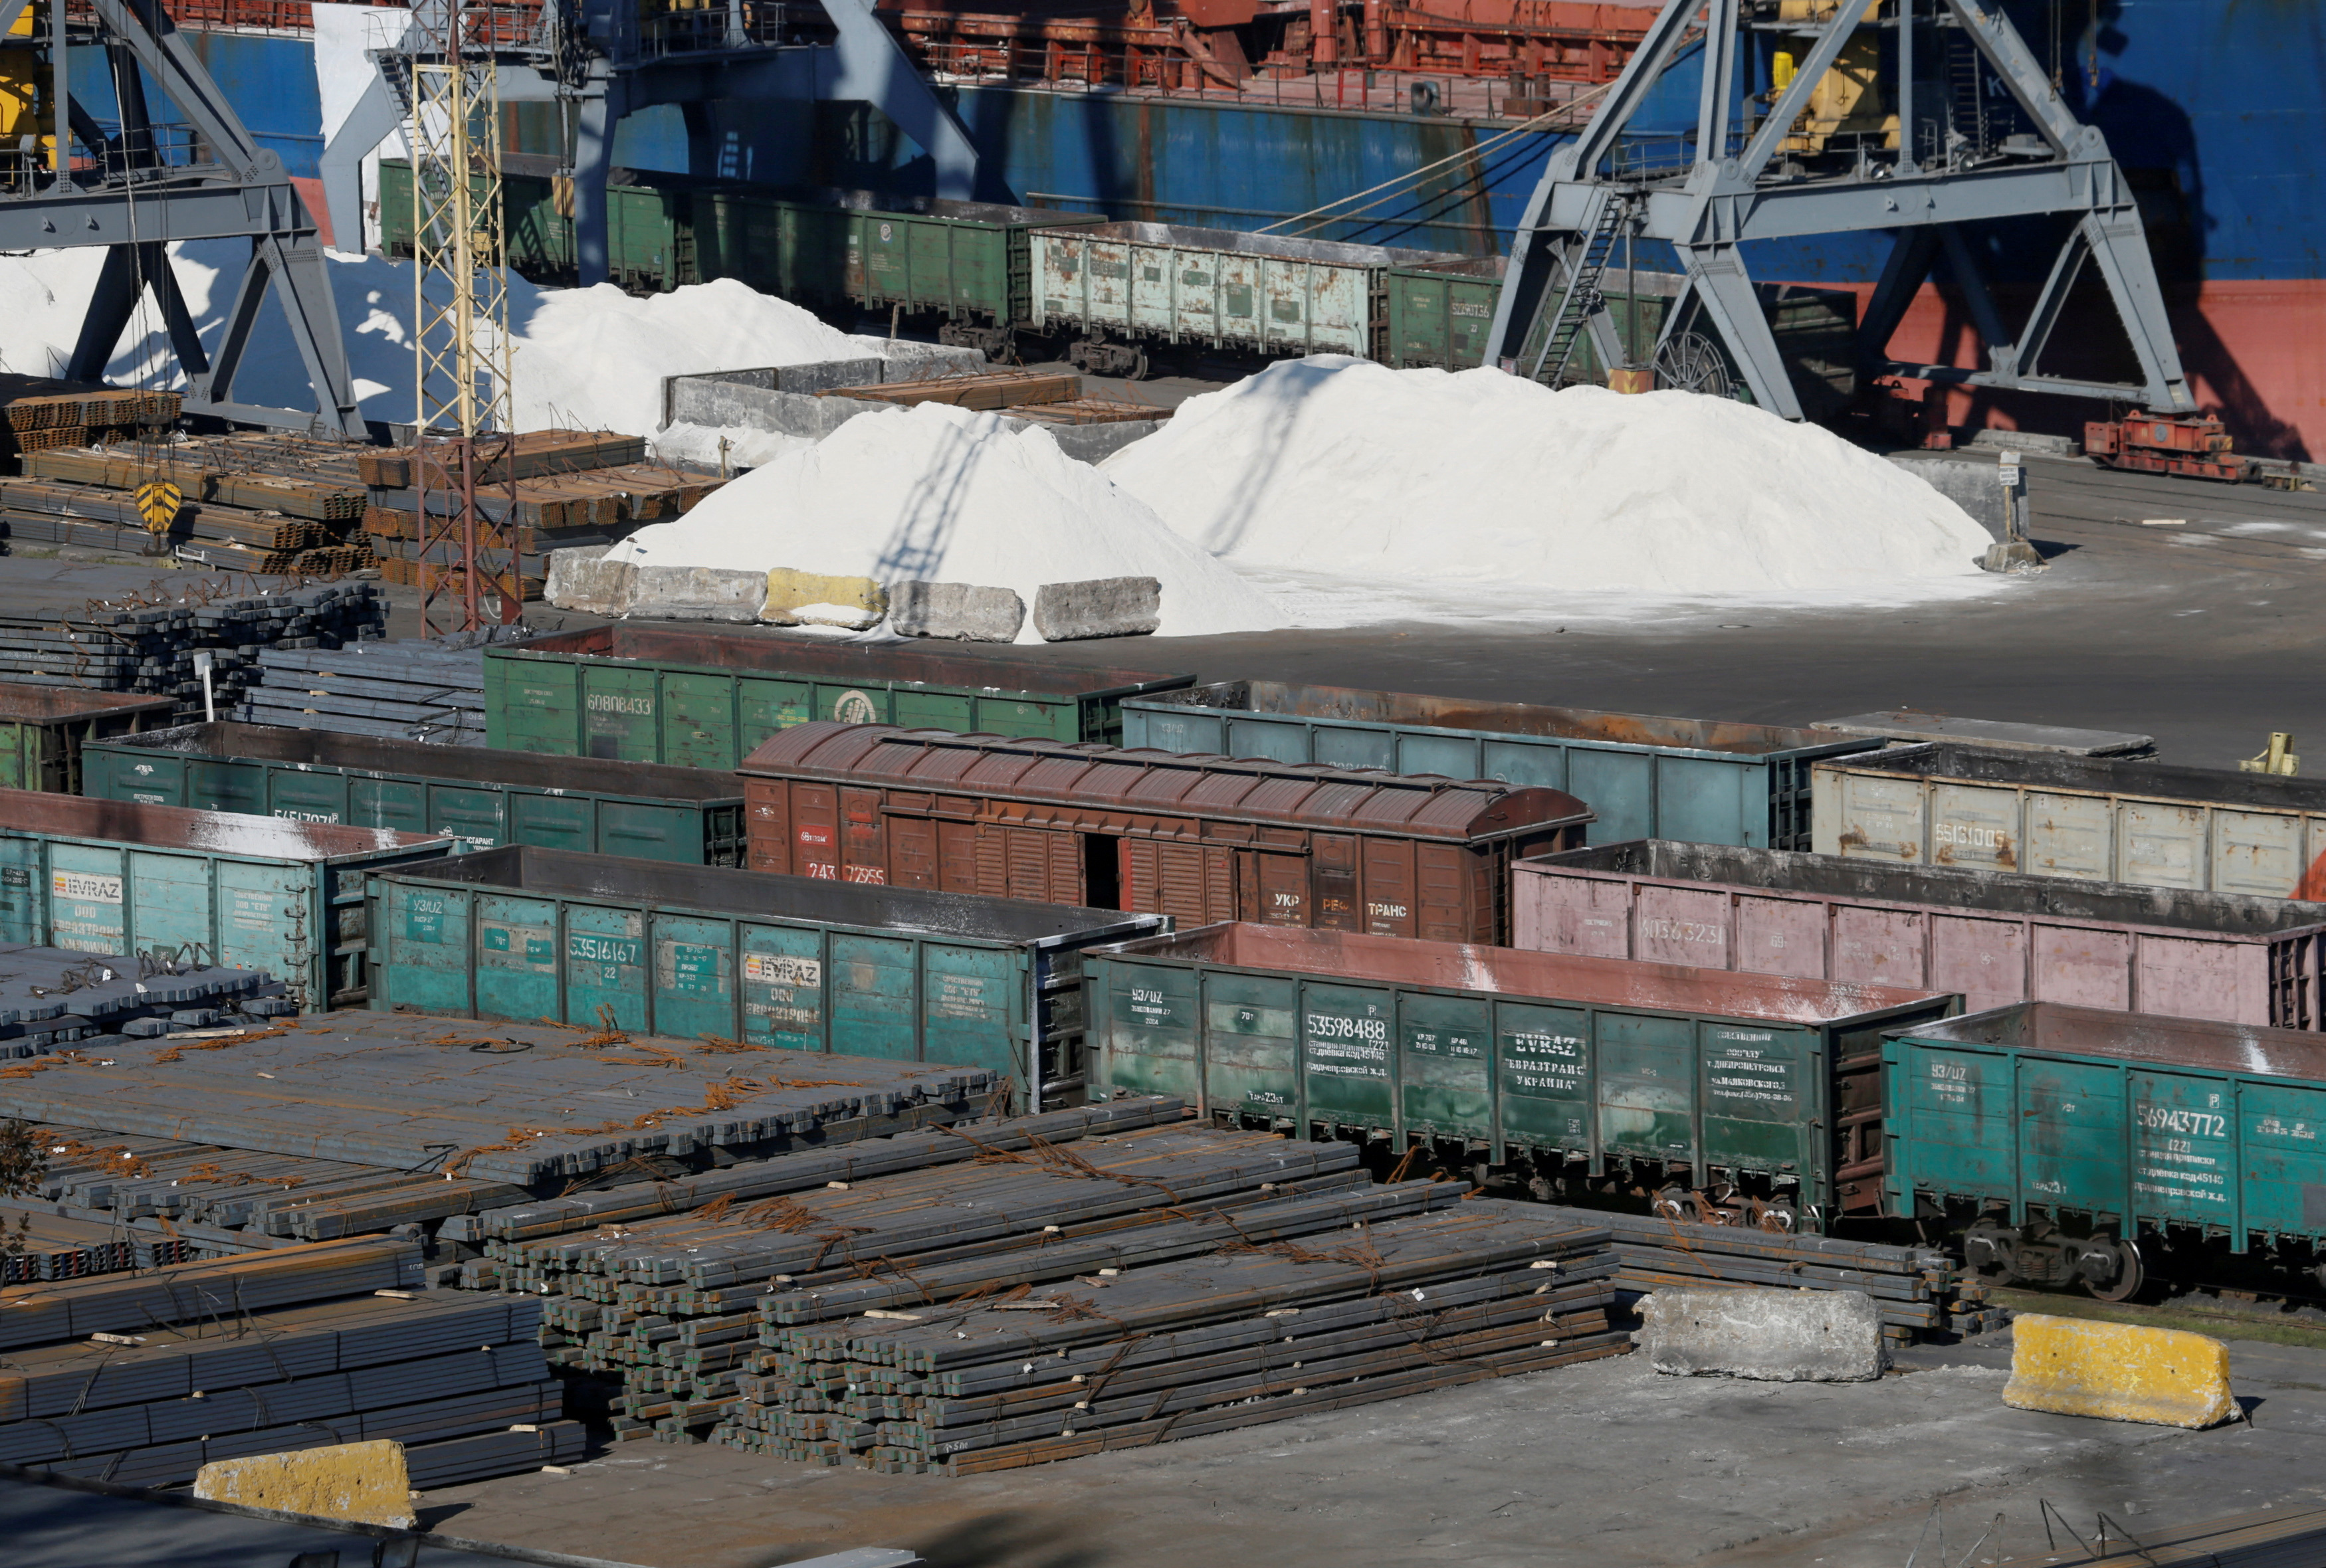 Freight train wagons are seen in Black sea port of Odessa